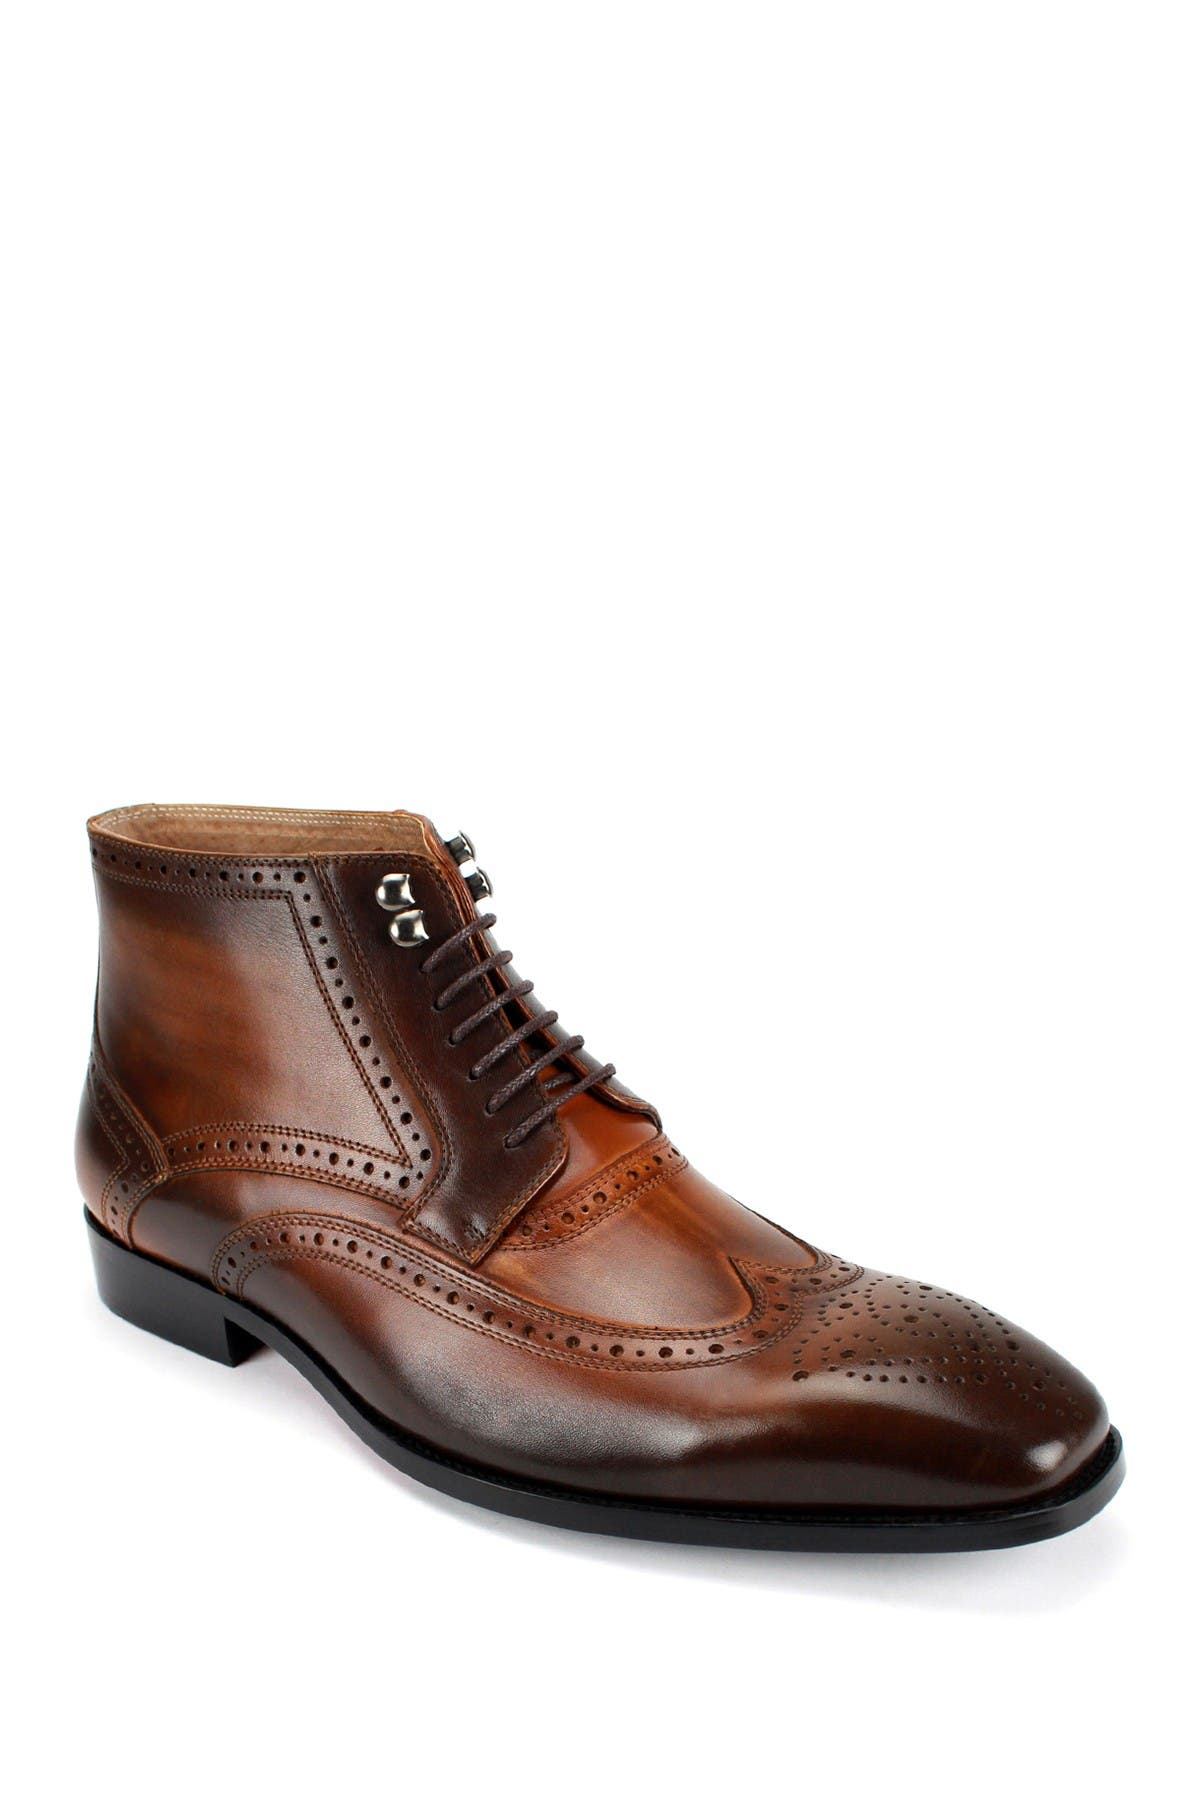 Steven Land | Wingtip Lace Up Boot 